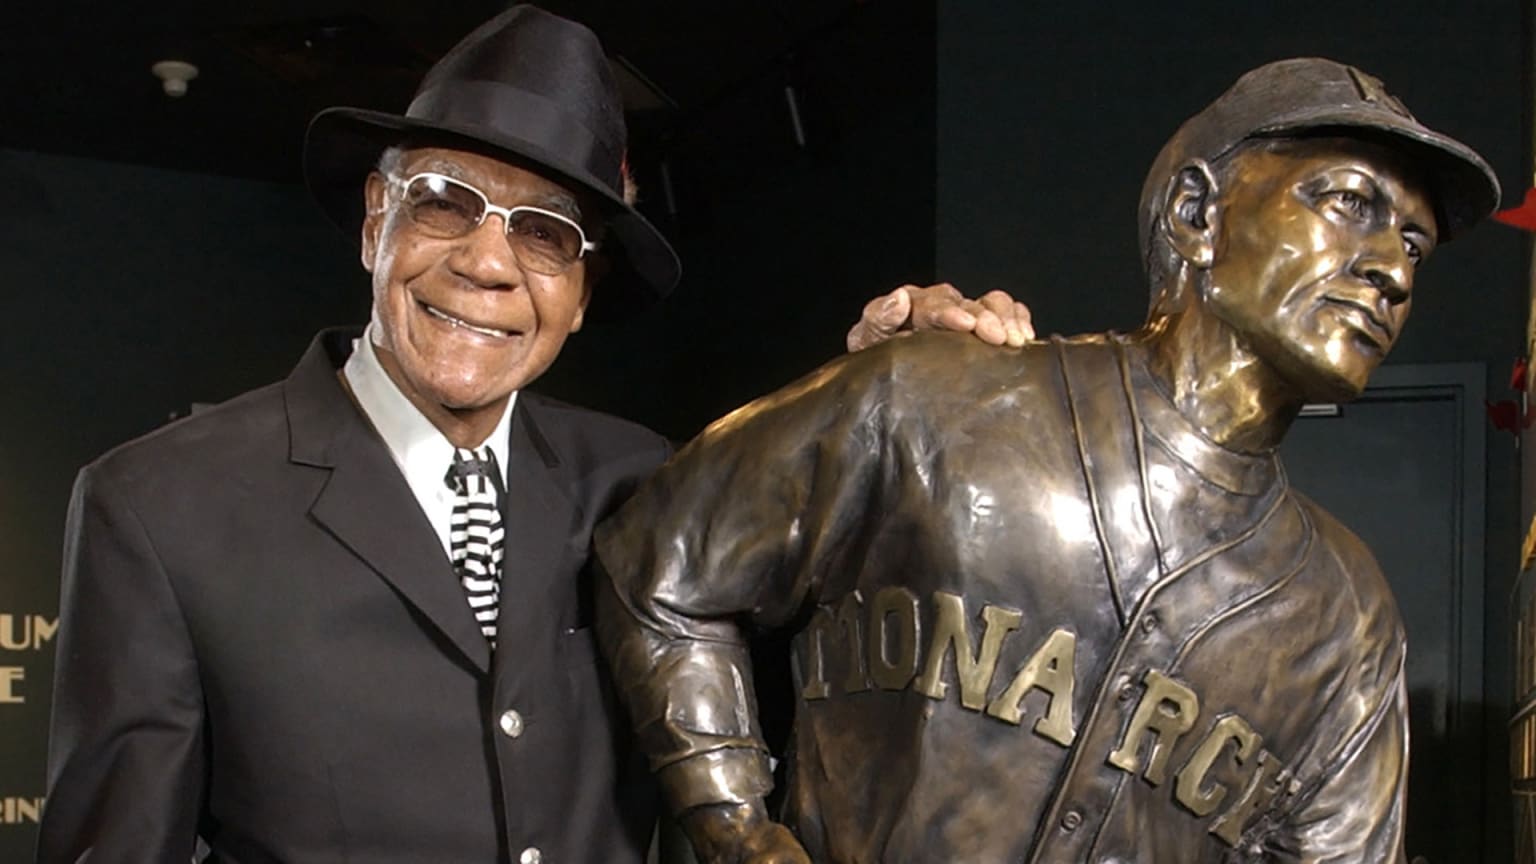 Buck O'Neil poses with a statue of himself